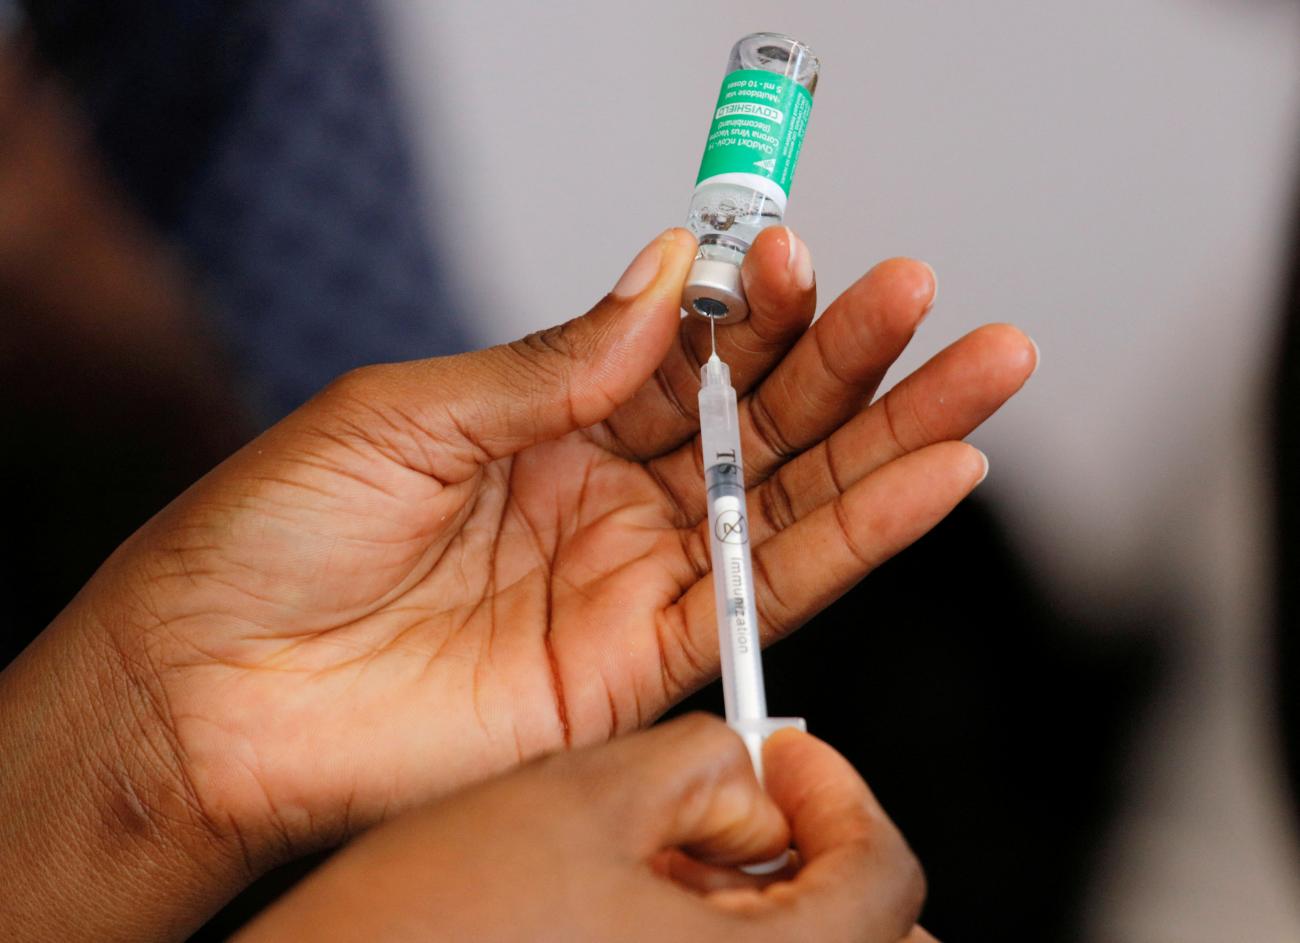 A nurse prepares a dose of the of COVID-19 vaccine during a vaccination campaign at the Ridge Hospital in Accra, Ghana, on March 2, 2021.